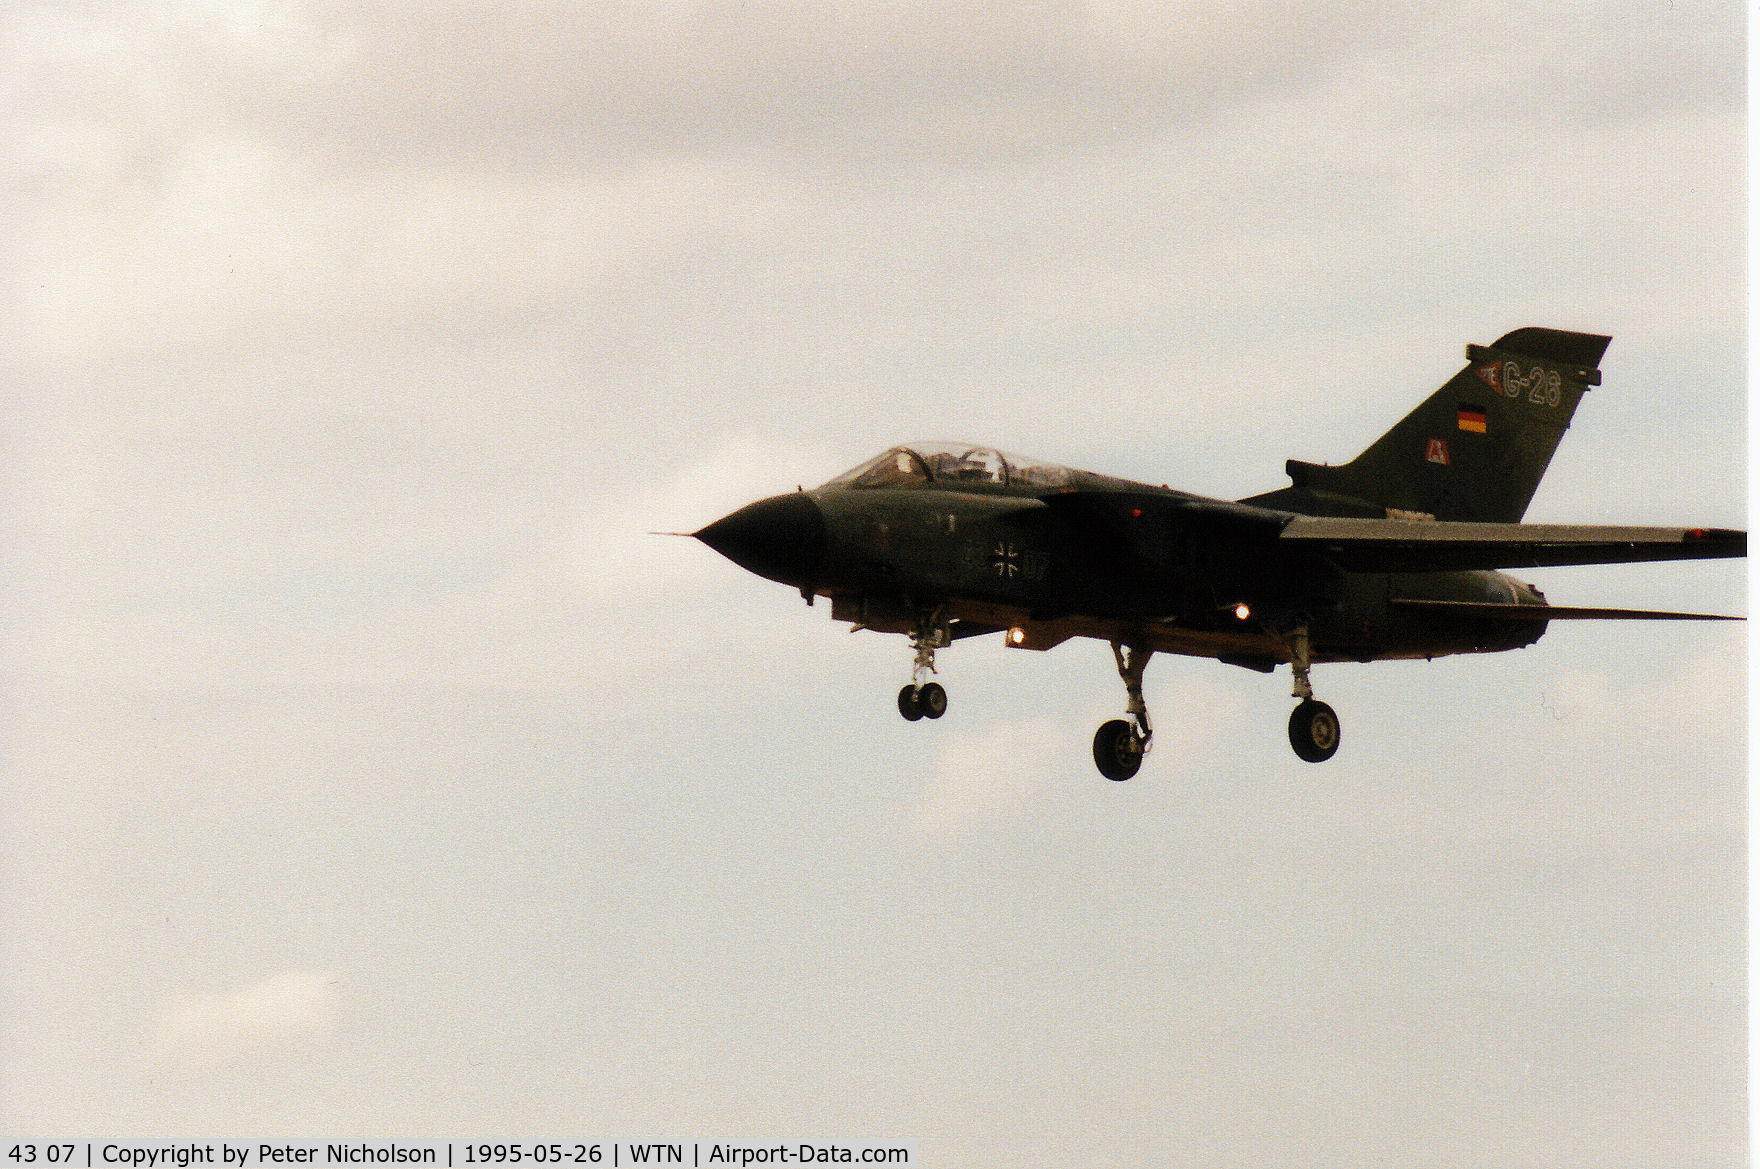 43 07, Panavia Tornado IDS(T) C/N 015/GT007/4007, Tornado IDS of the Tri-National Tornado Training Establishment - TTTE - at RAF Cottesmore on final approach to RAF Waddington in May 1995.